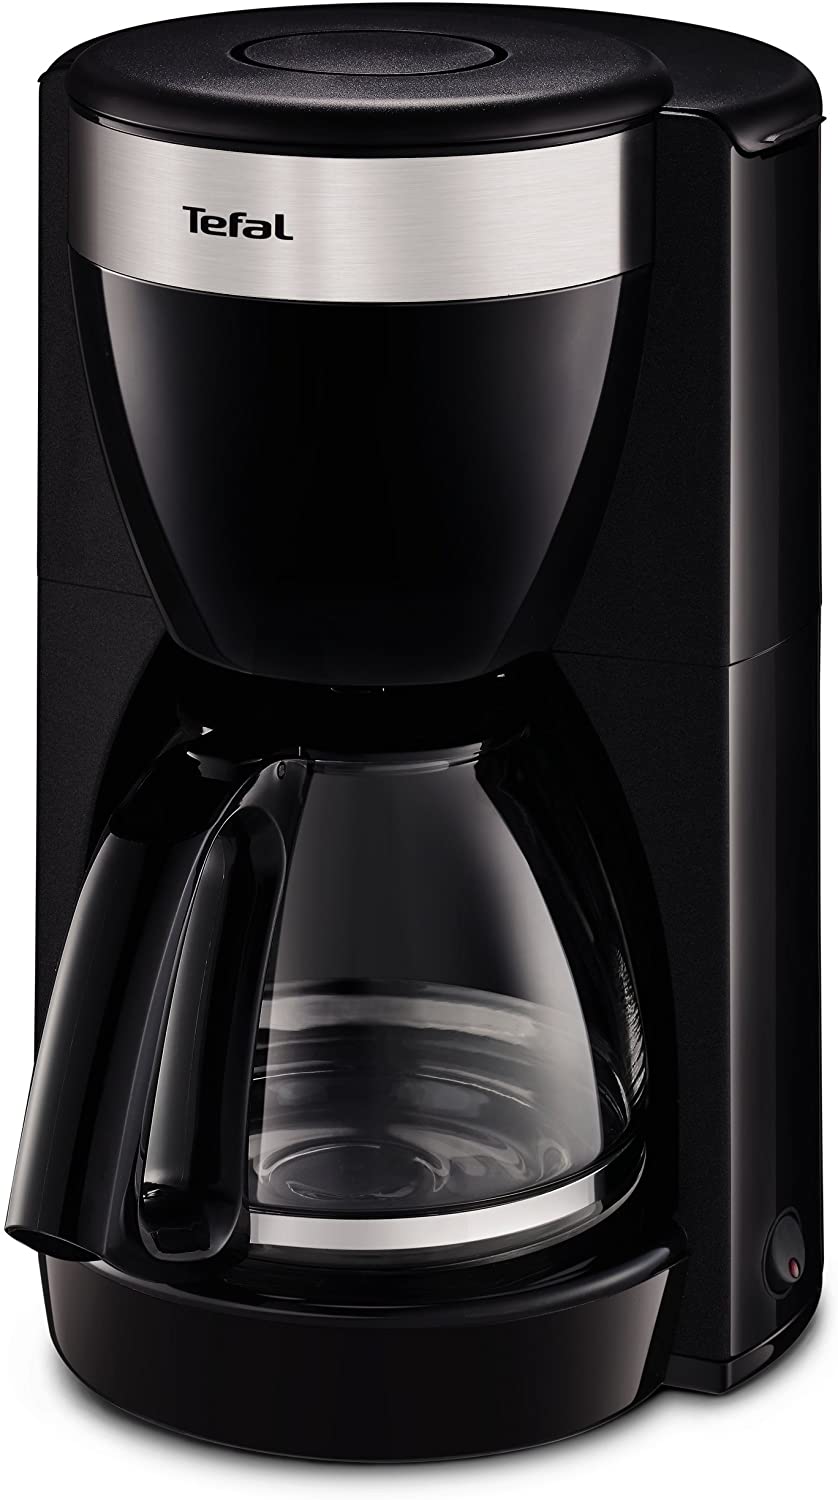 Tefal CM1808 Deflini Plus Glass Coffee Maker with Stainless Steel Elements 10-15 Cups, 1000 W, Black